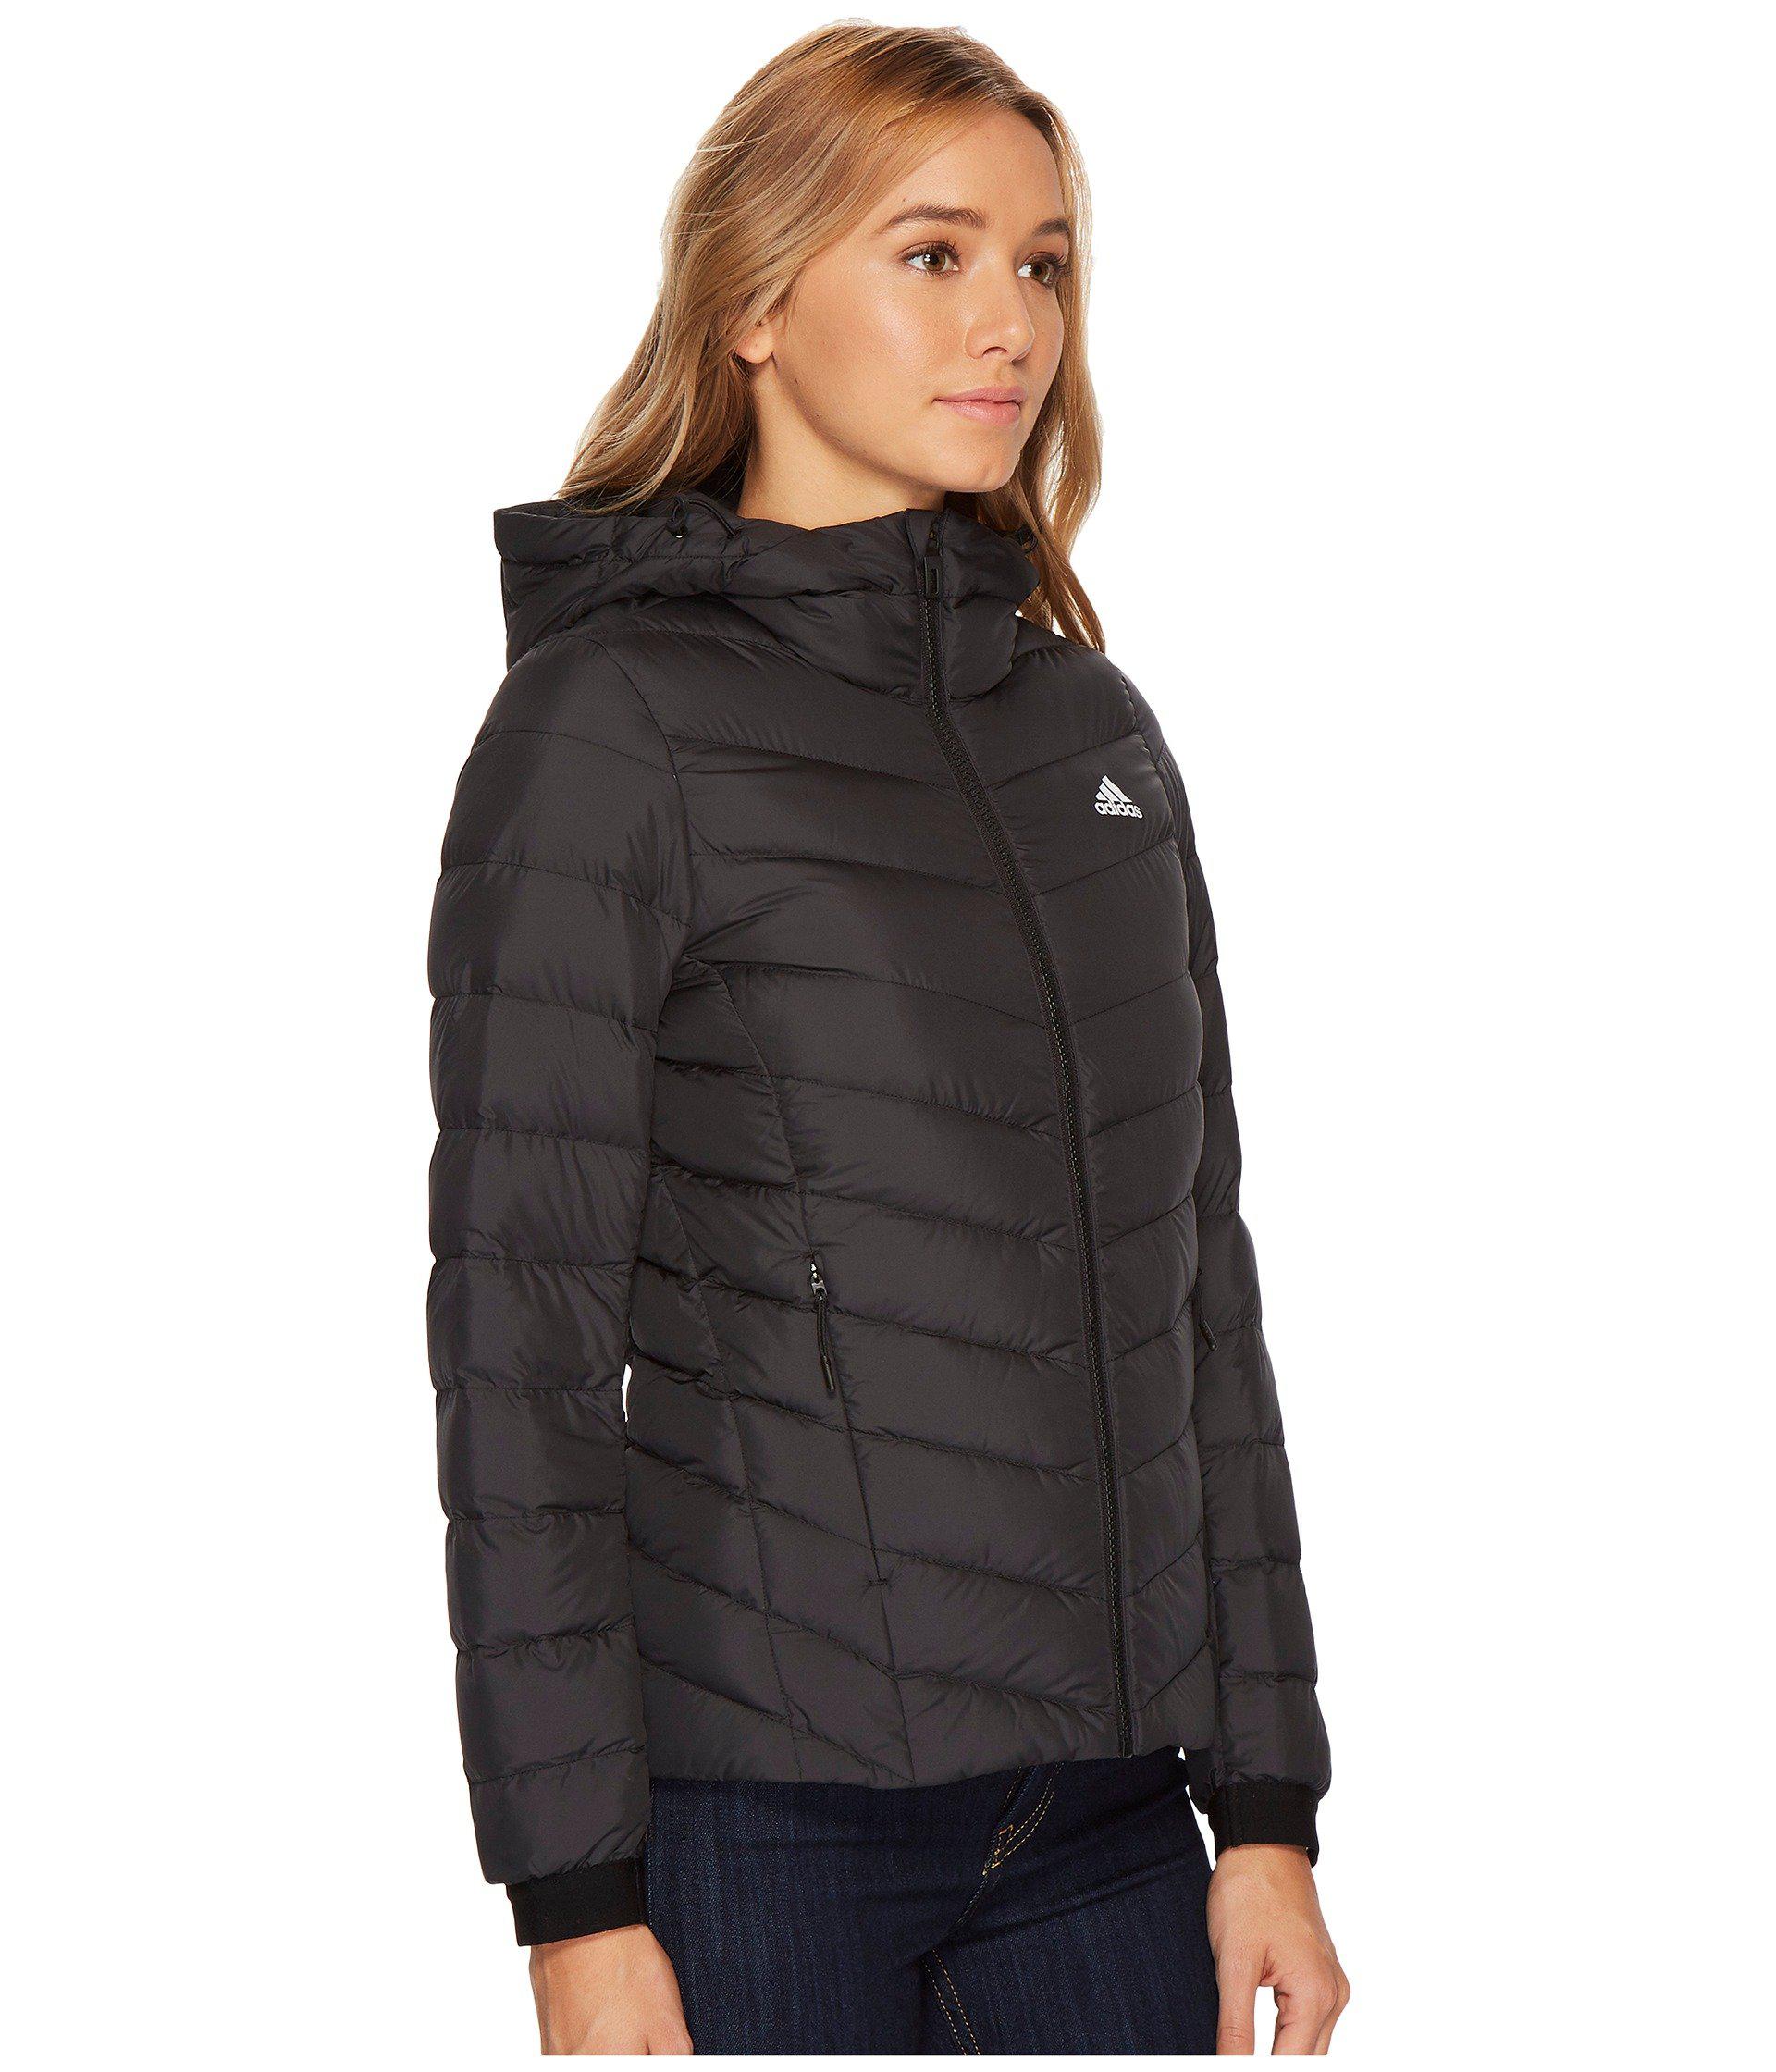 Adidas Nuvic Jacket Online Hotsell, UP TO 68% OFF | www.realliganaval.com